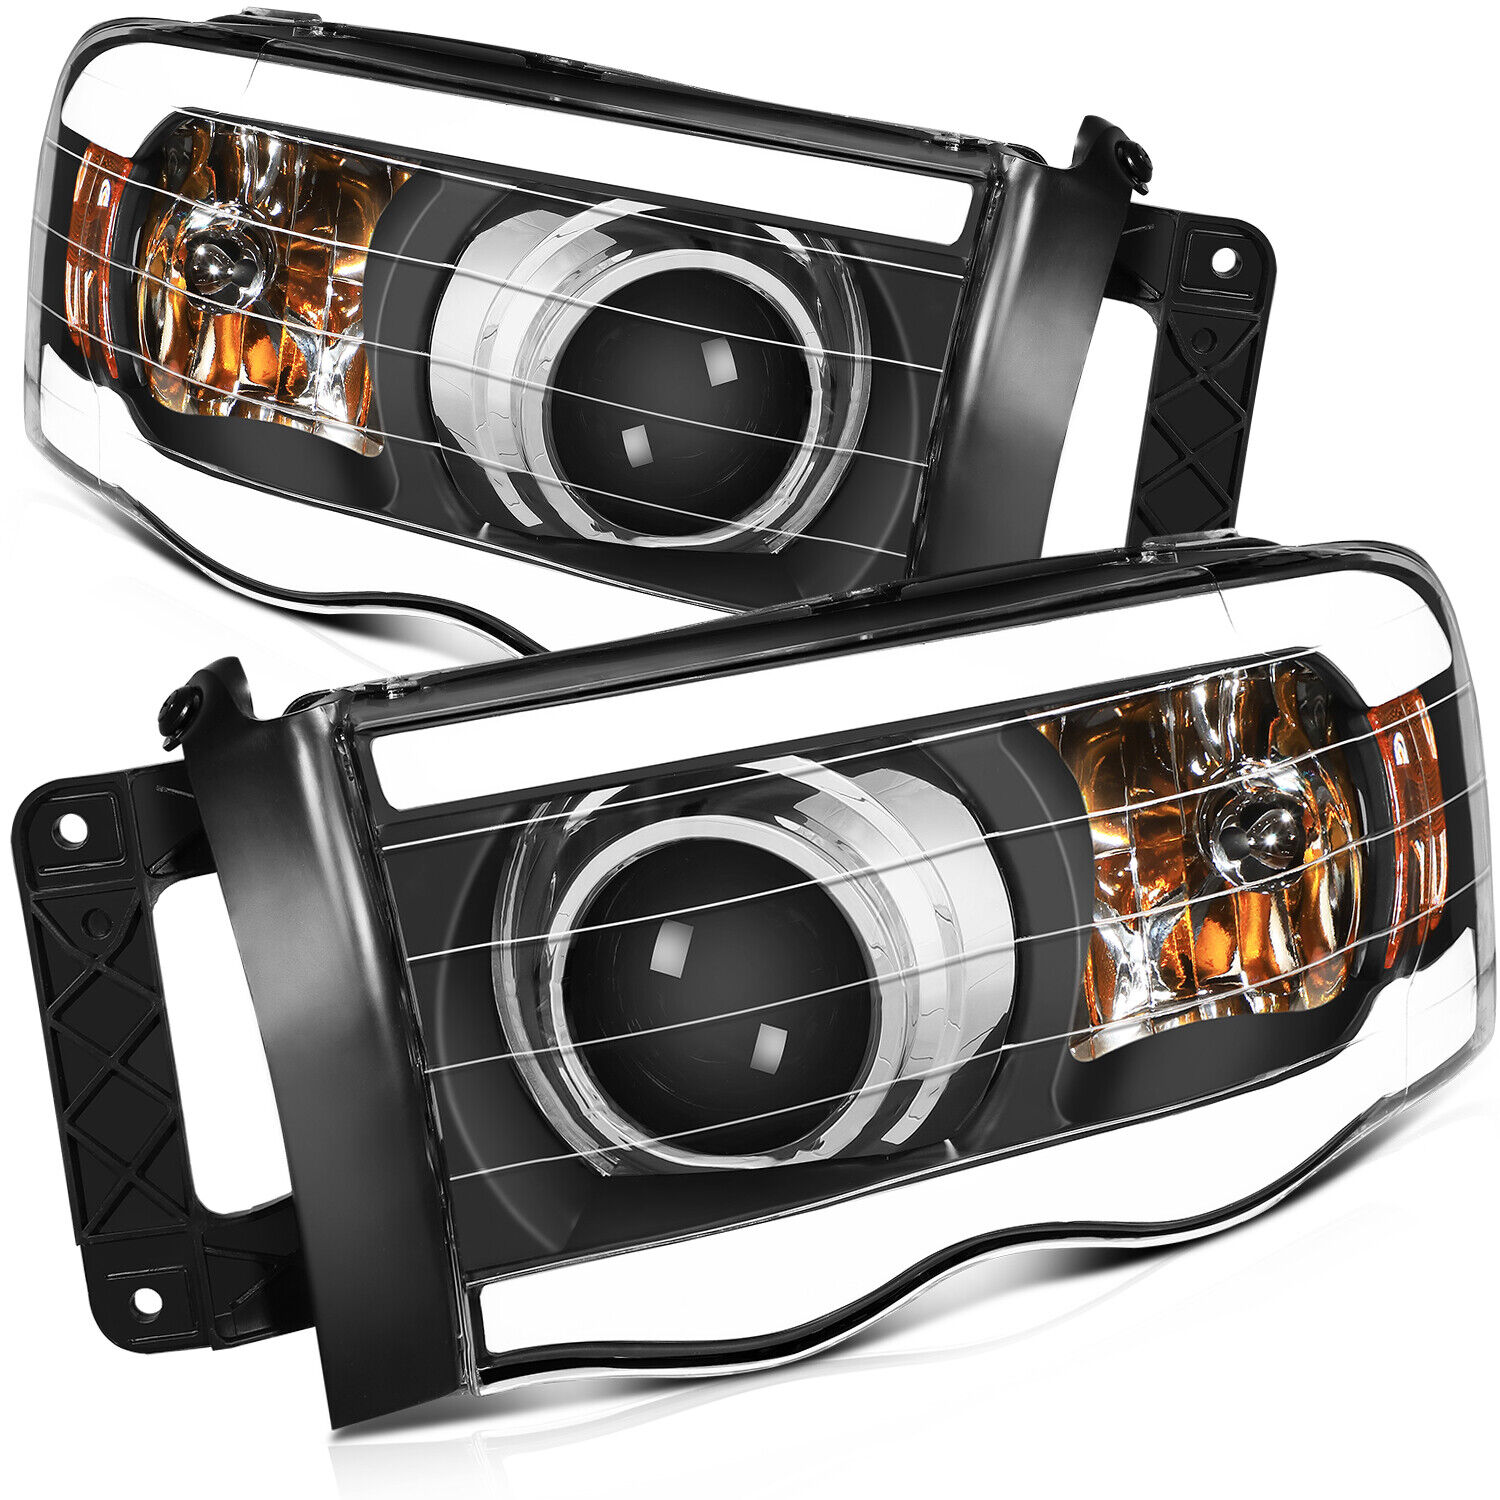 For 2002-2005 Dodge Ram 1500 2500 3500 Black Projector Headlight Pair W/ LED DRL